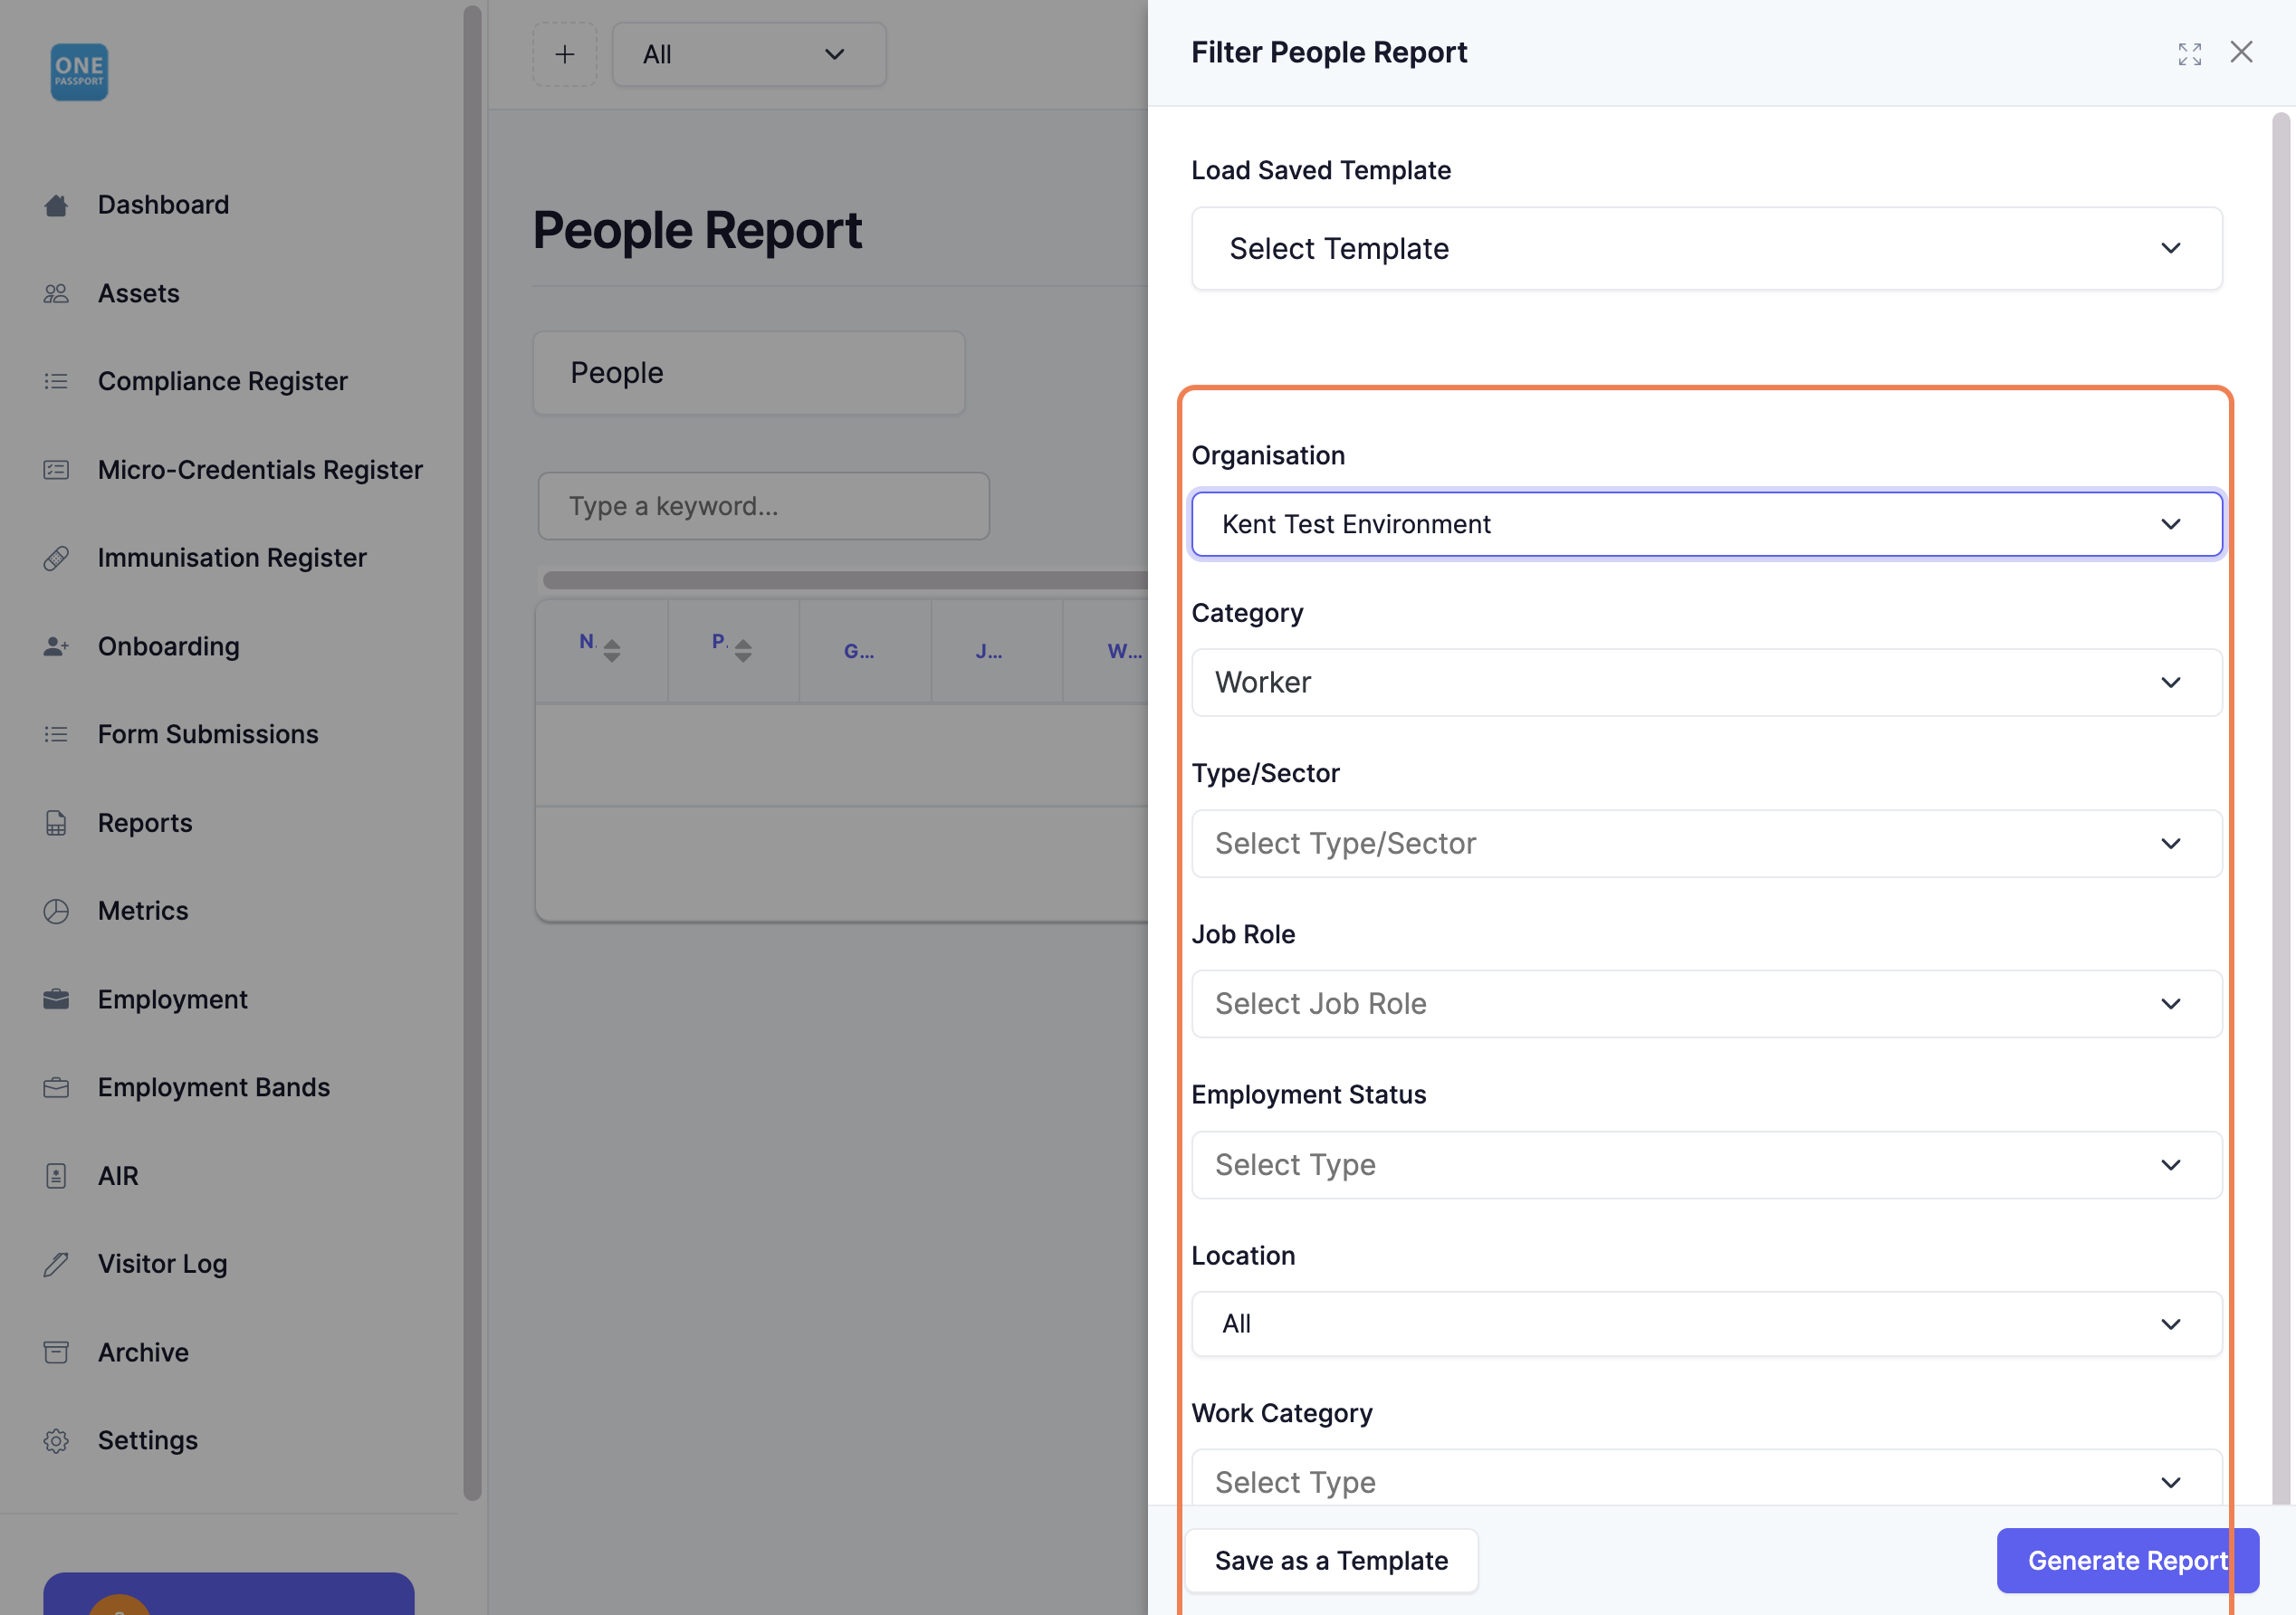 To produce a report tailored to your organisation, select it from the dropdown menu.